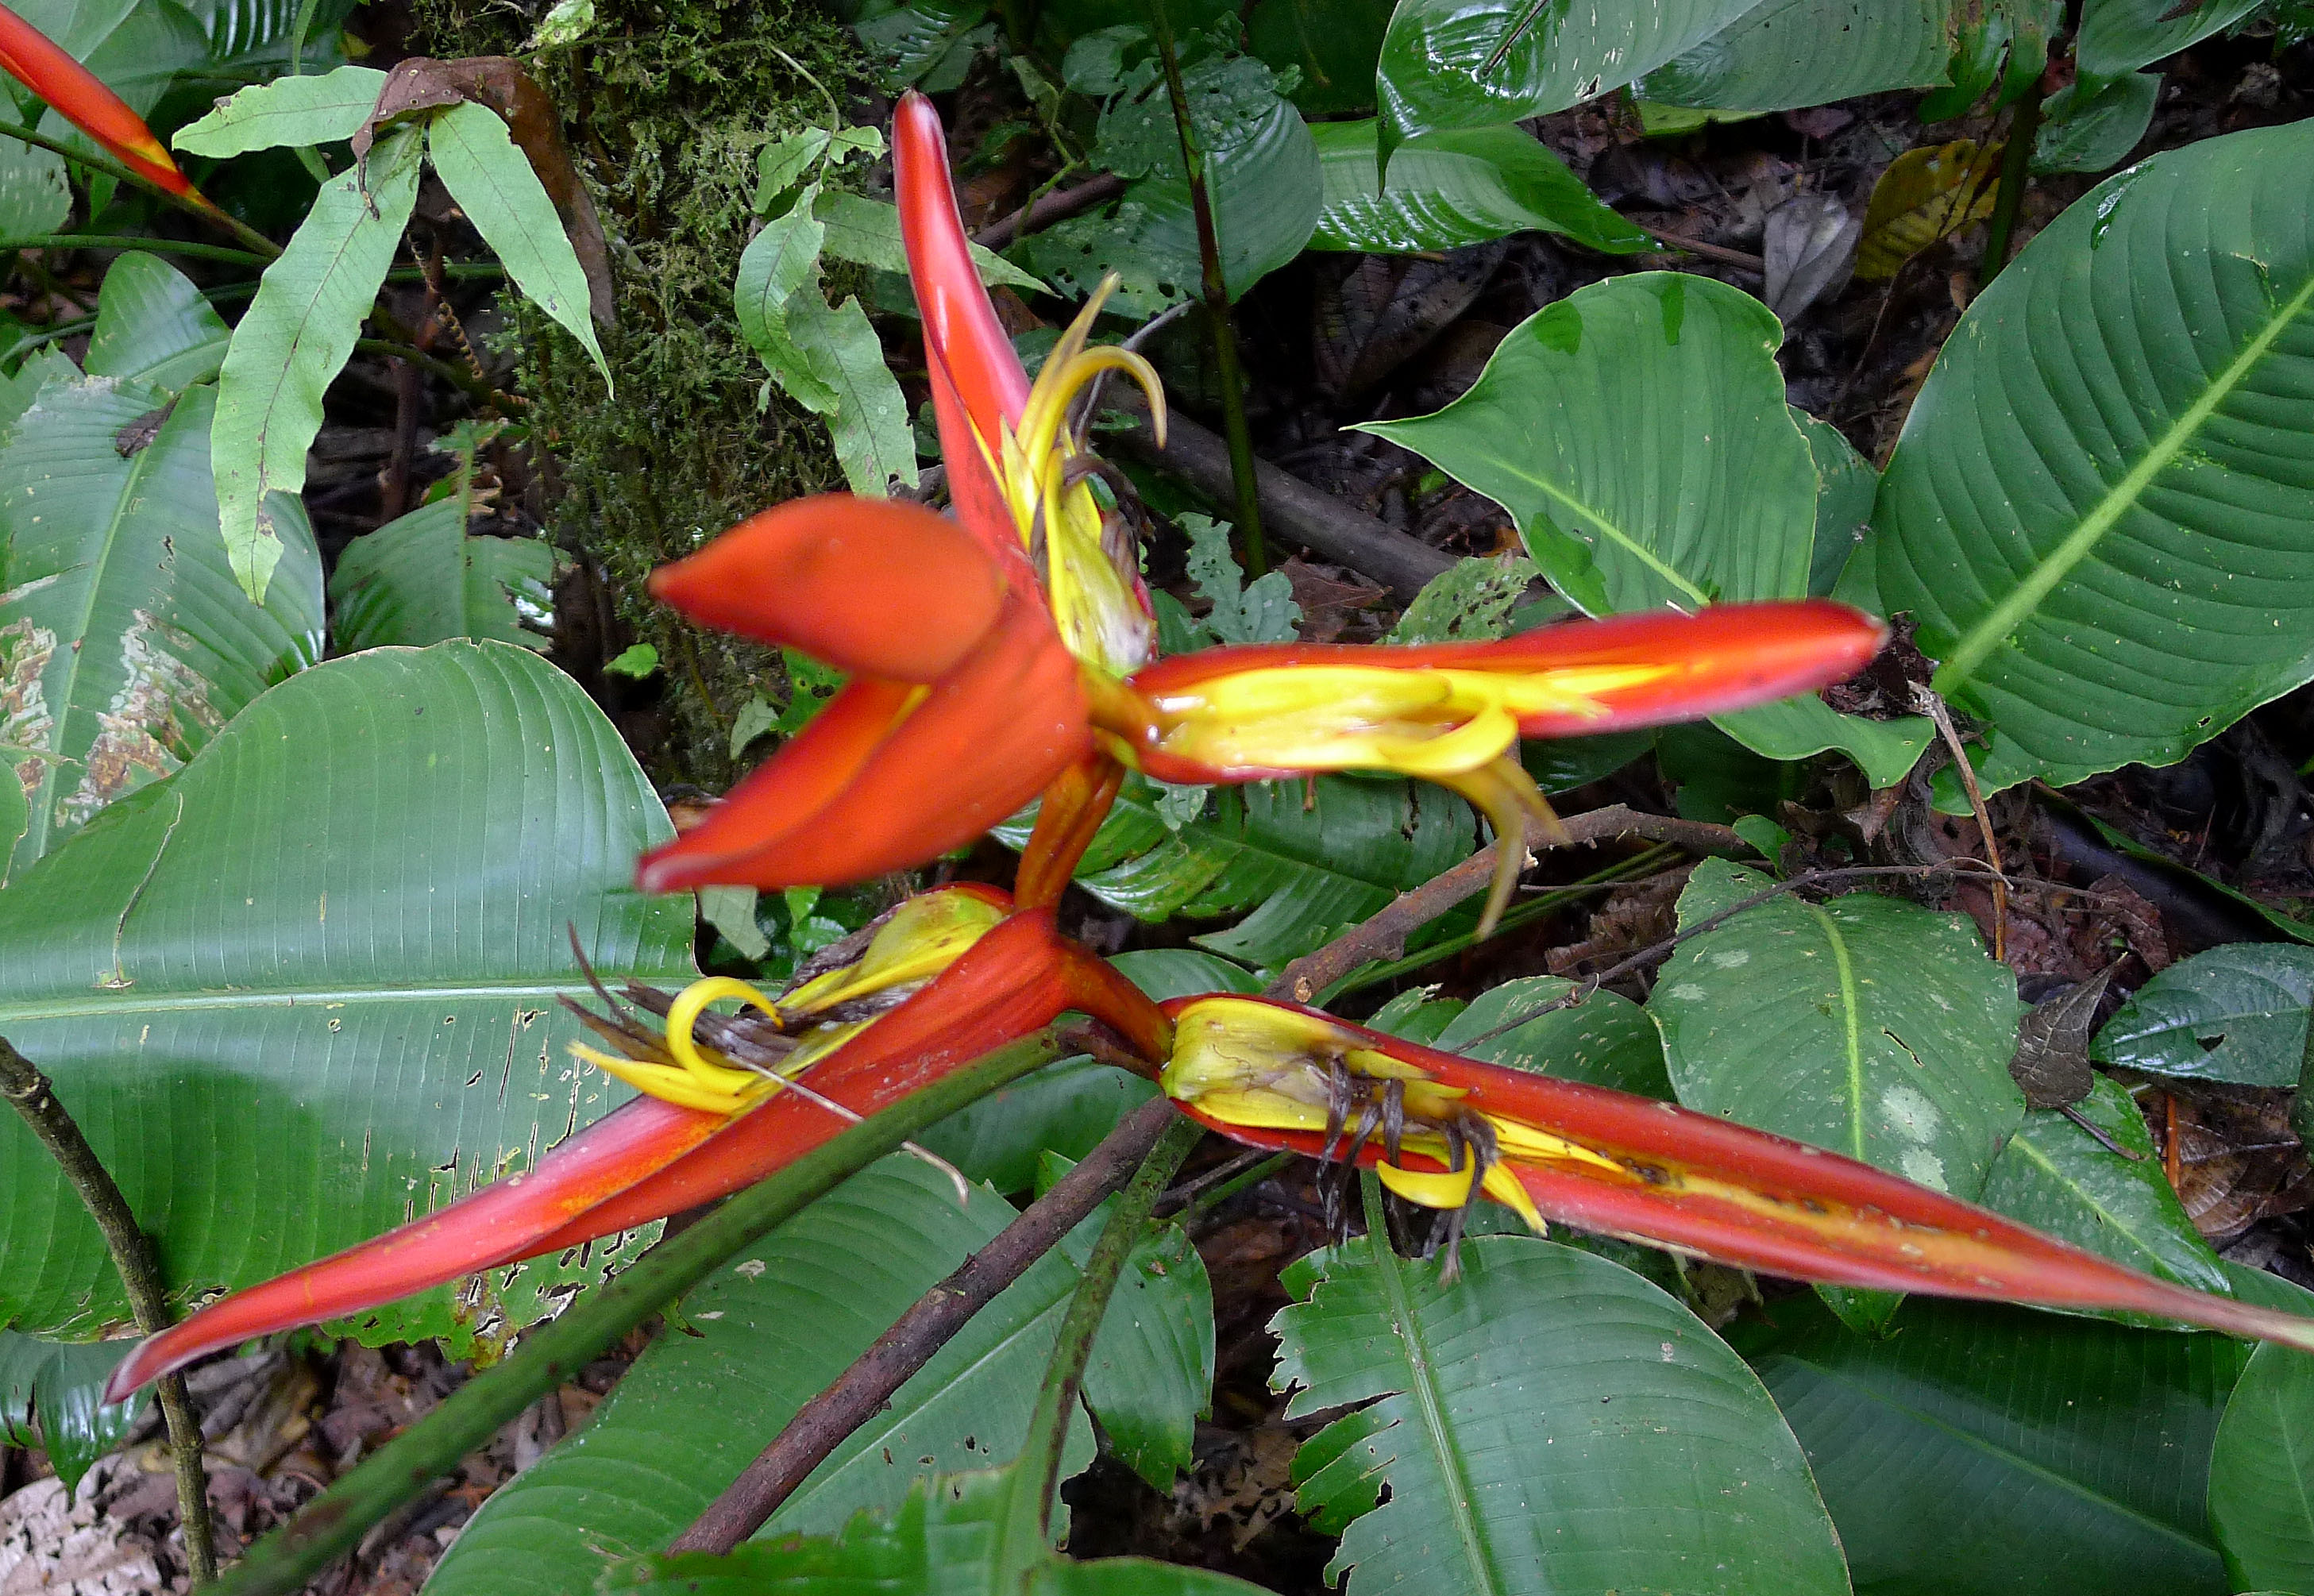 Unidentified Heliconia.